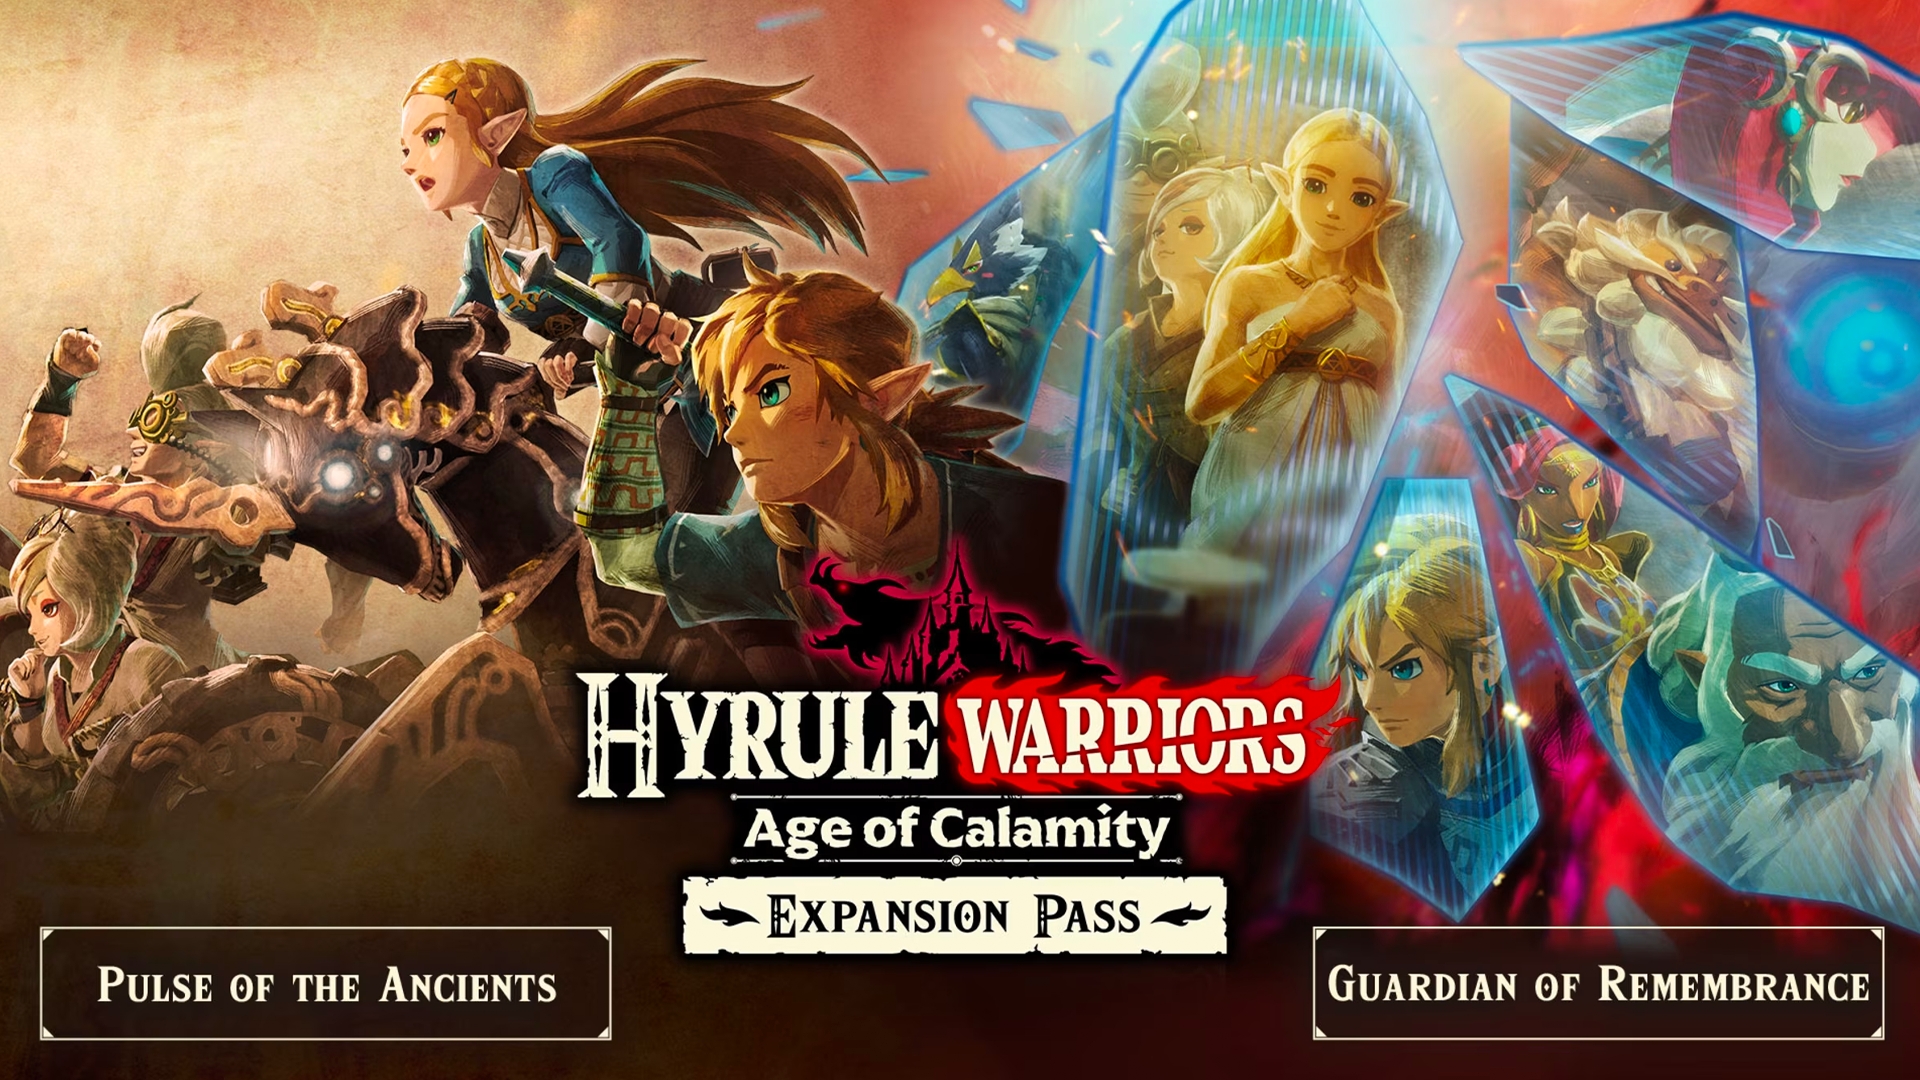 Warriors Nintendo Hyrule Age Switch of Expansion Buy Pass Calamity Eshop